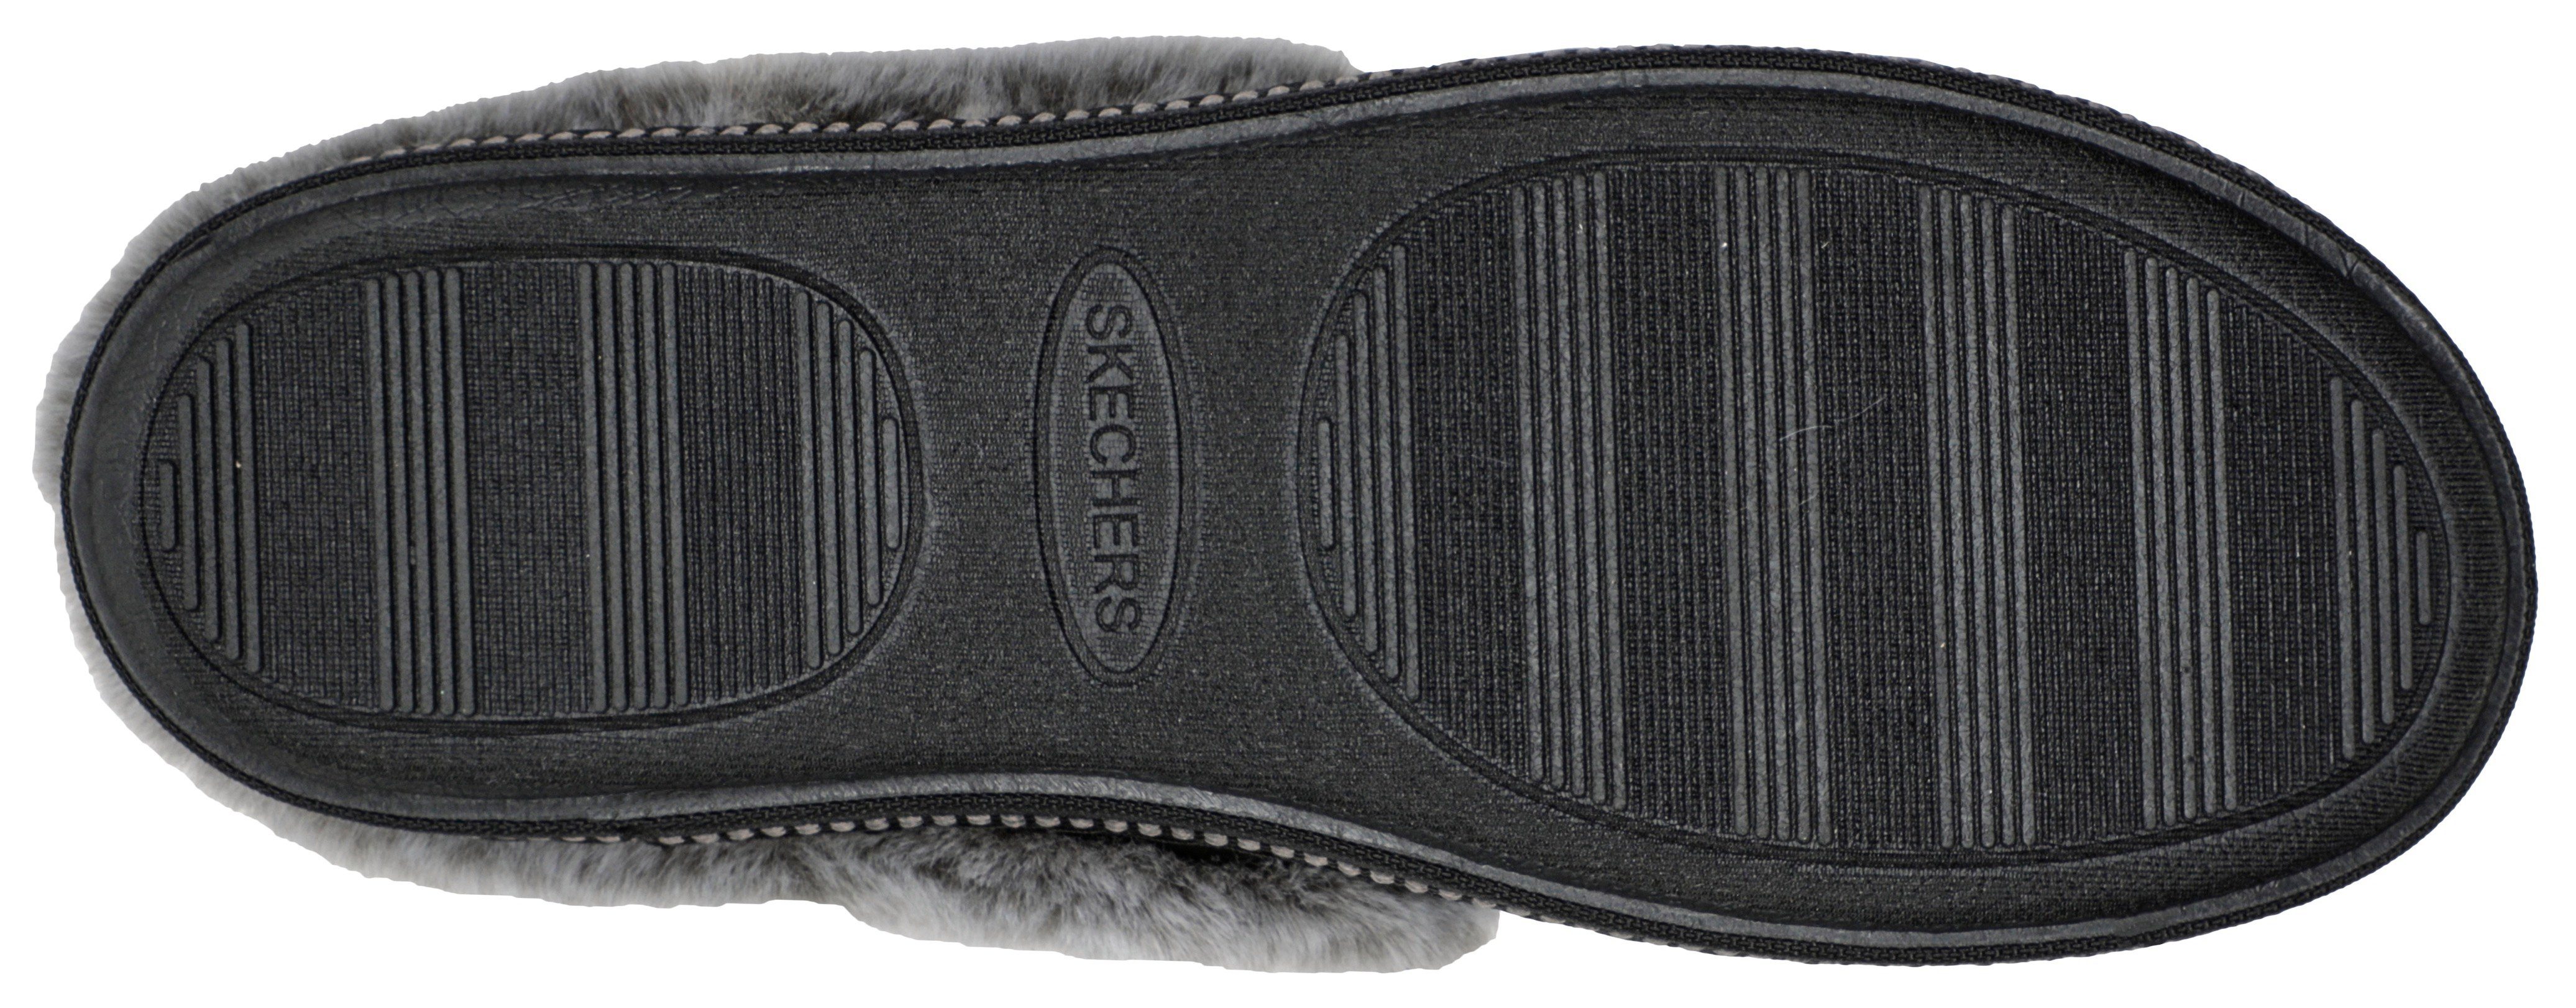 Skechers Pantoffels COZY CAMPFIRE-LOVELY LIFE